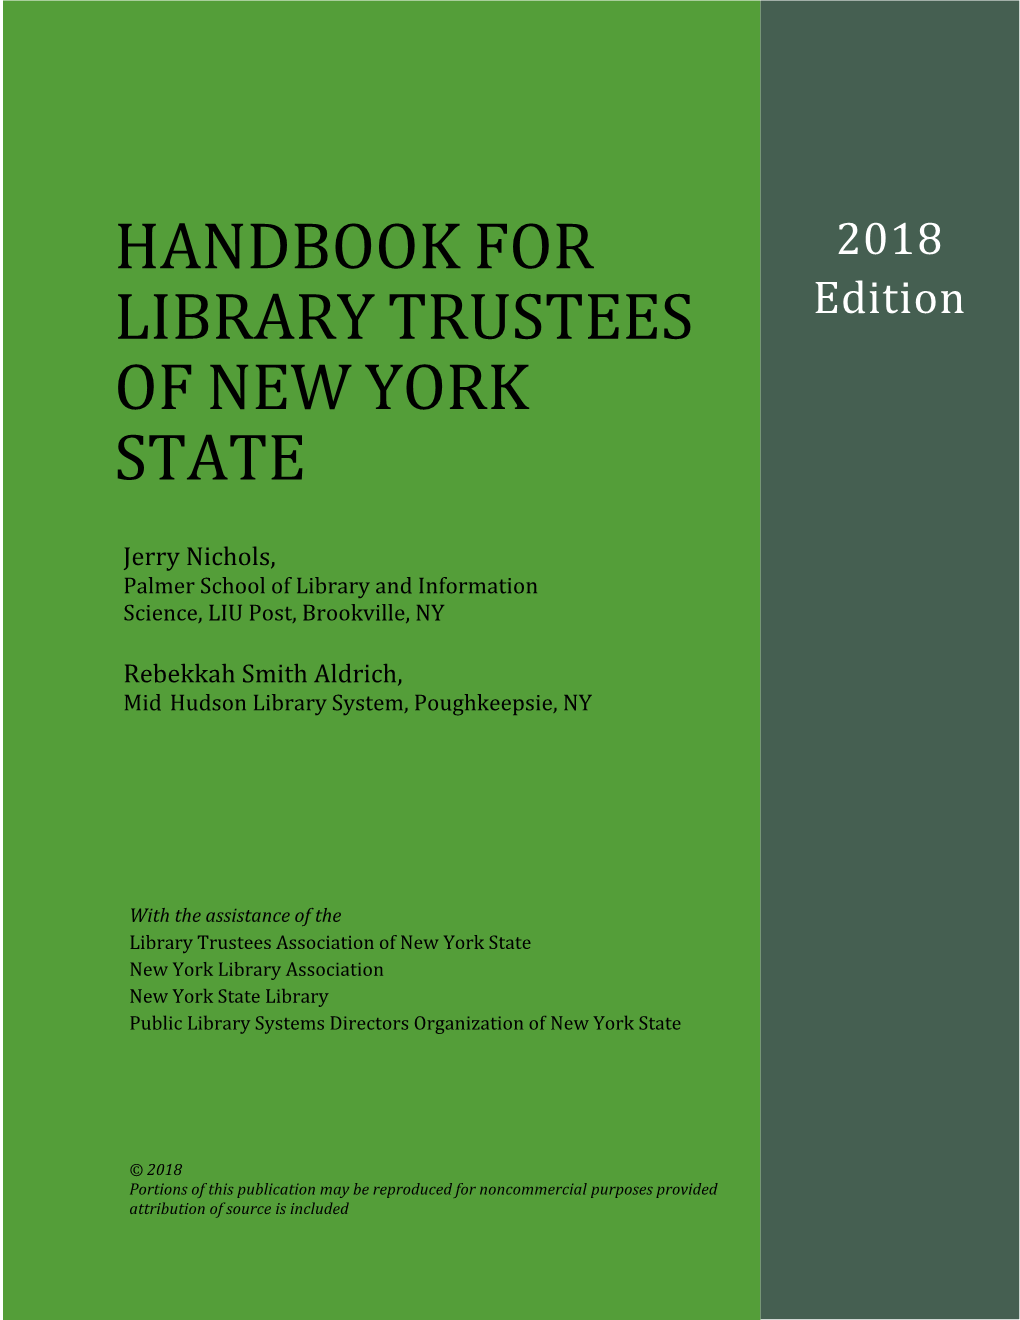 Handbook for Library Trustees of New York State; 2018 Edition